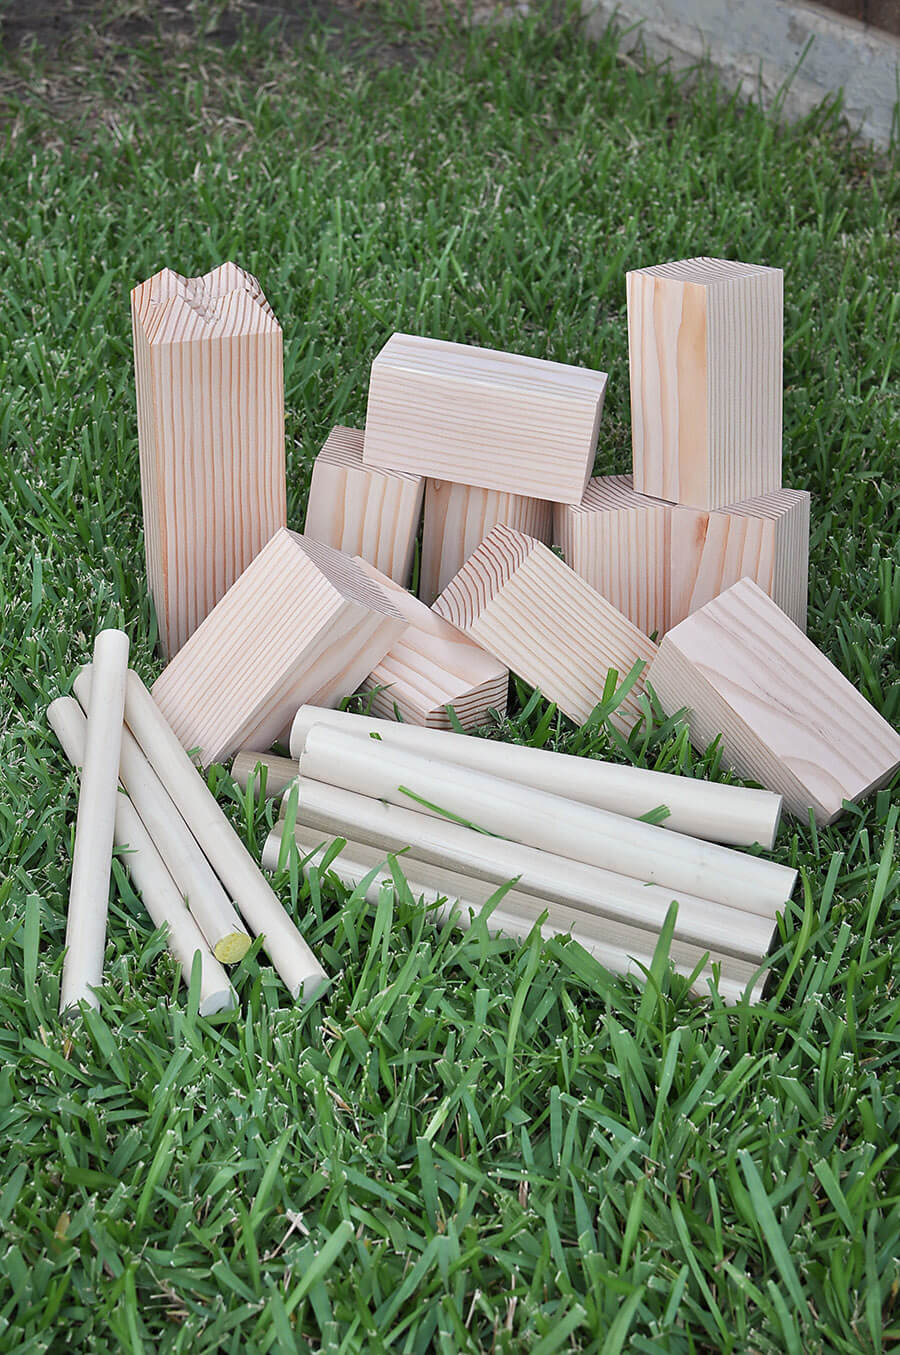 Make Your Own Kubb Lawn Game